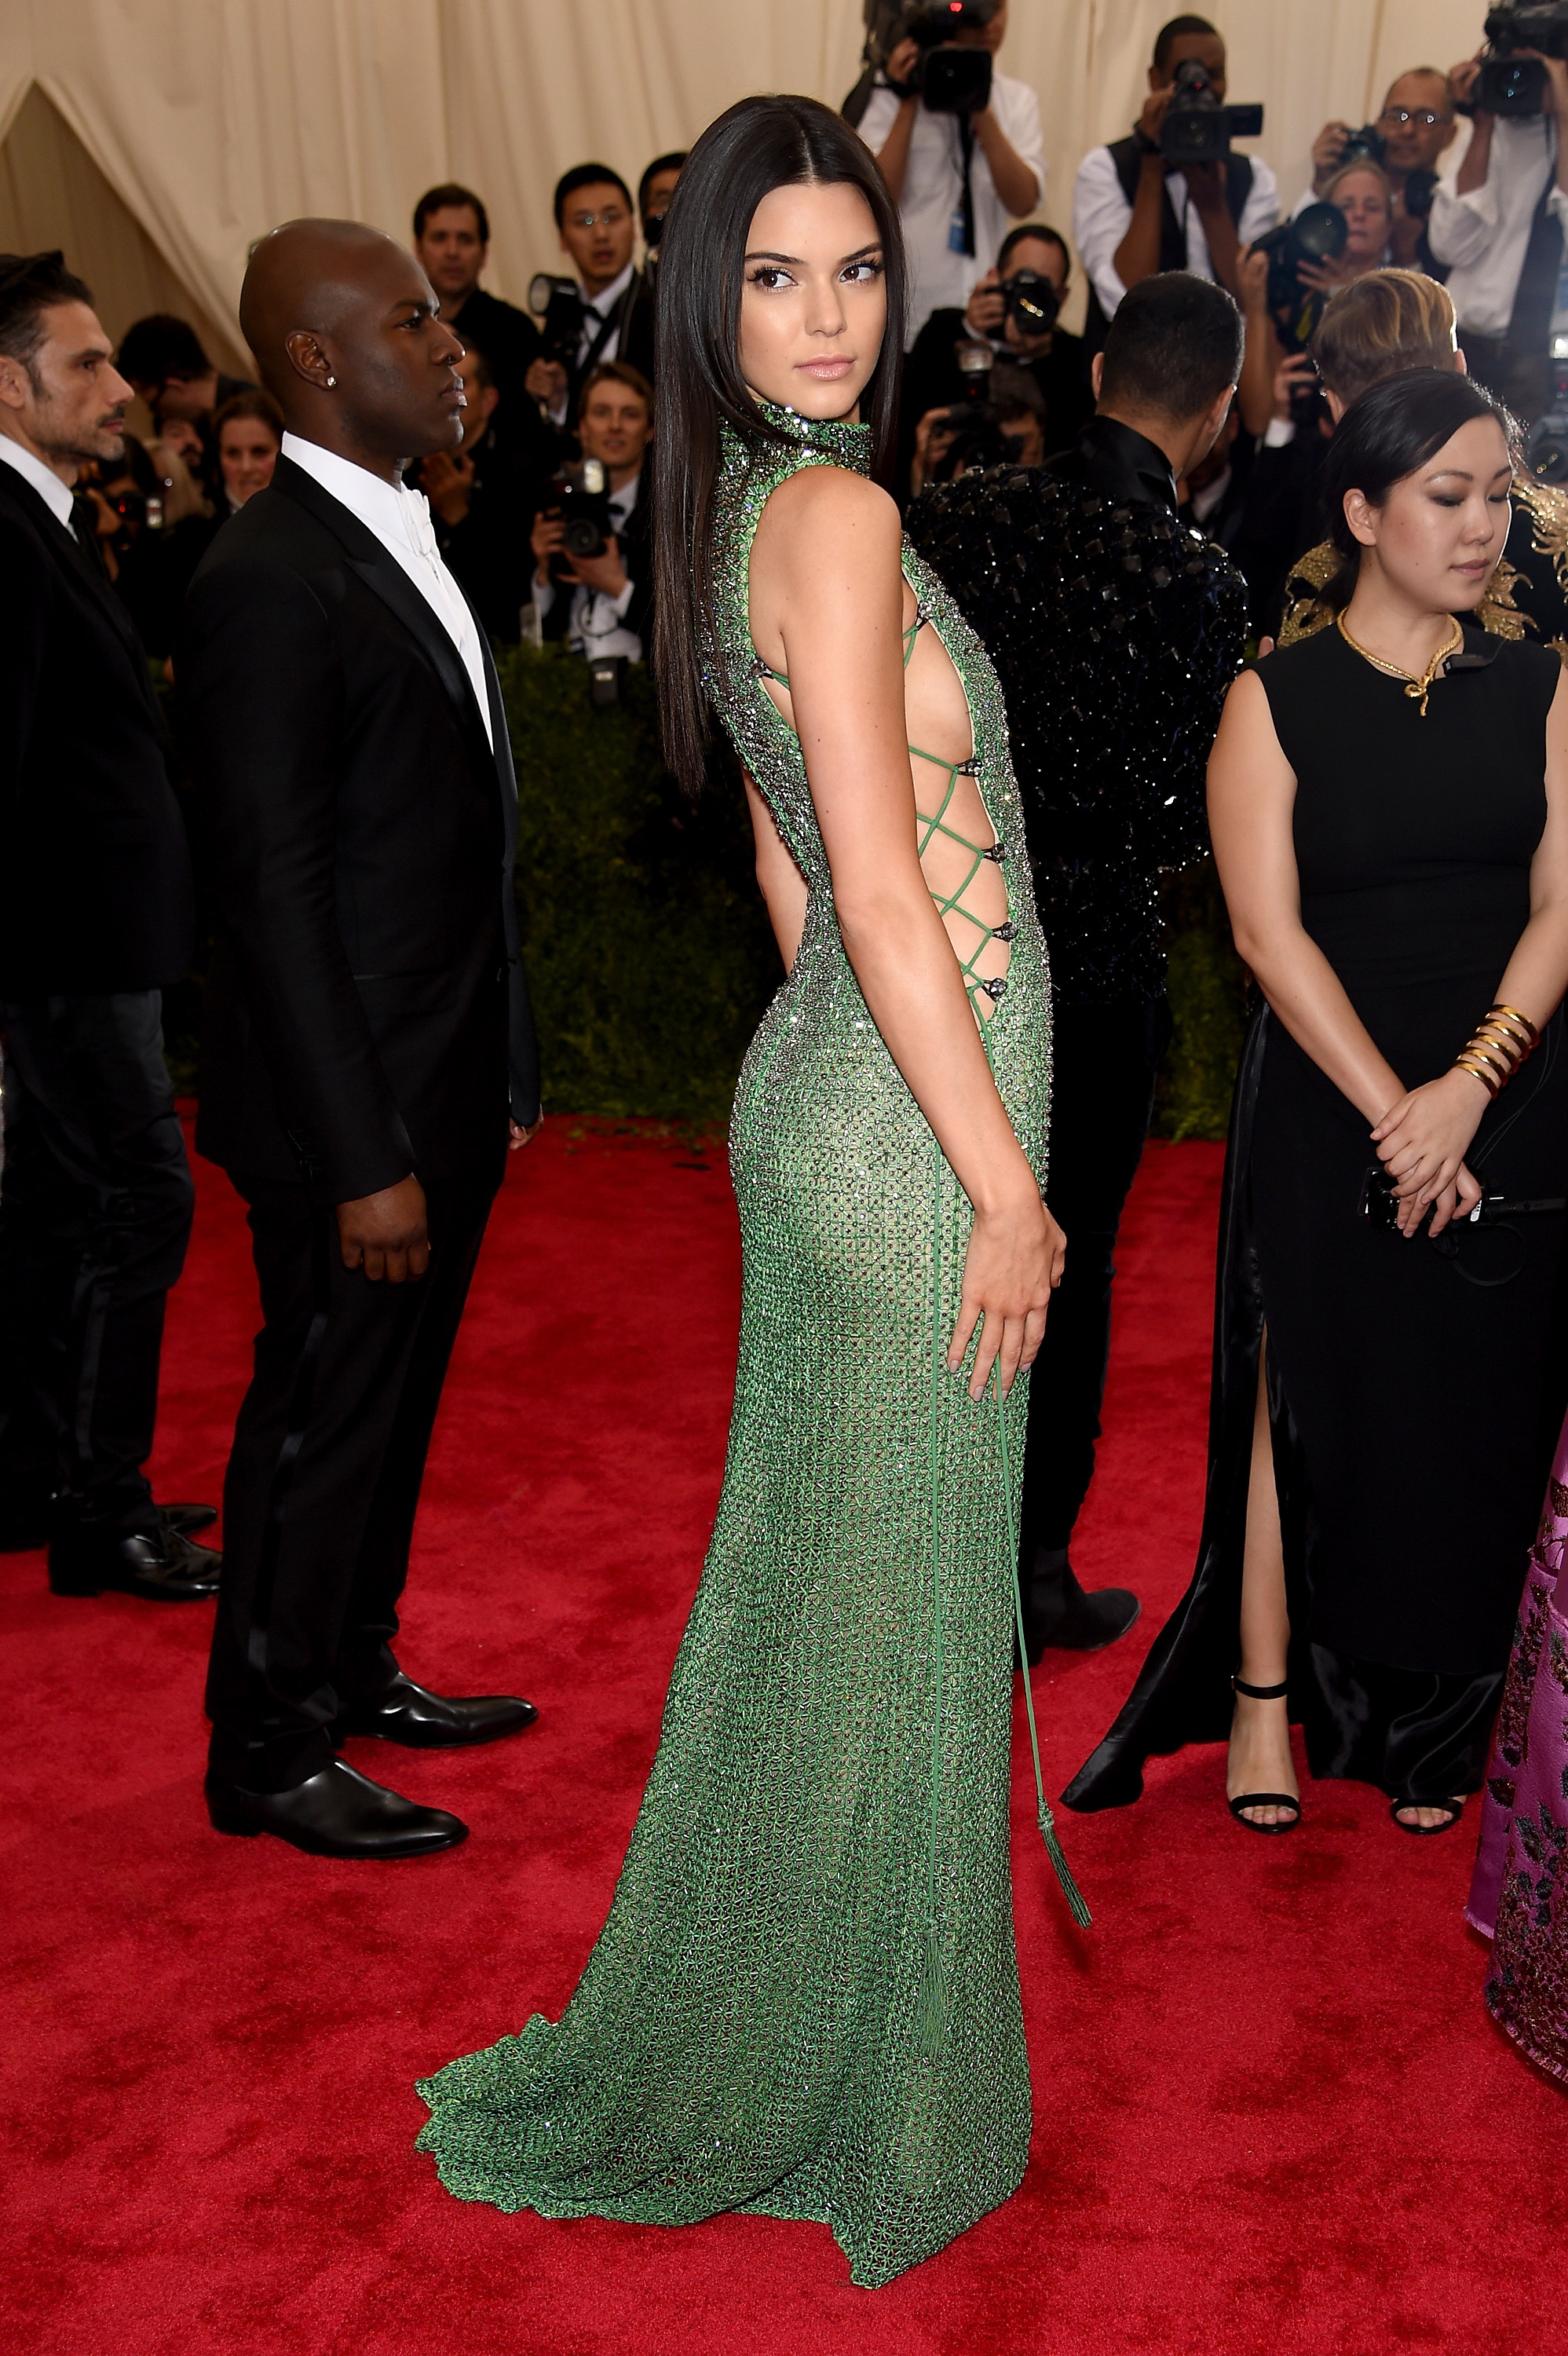 Kendall Jenner At The Met Gala Looks Radiant In Green Bejeweled Calvin Klein